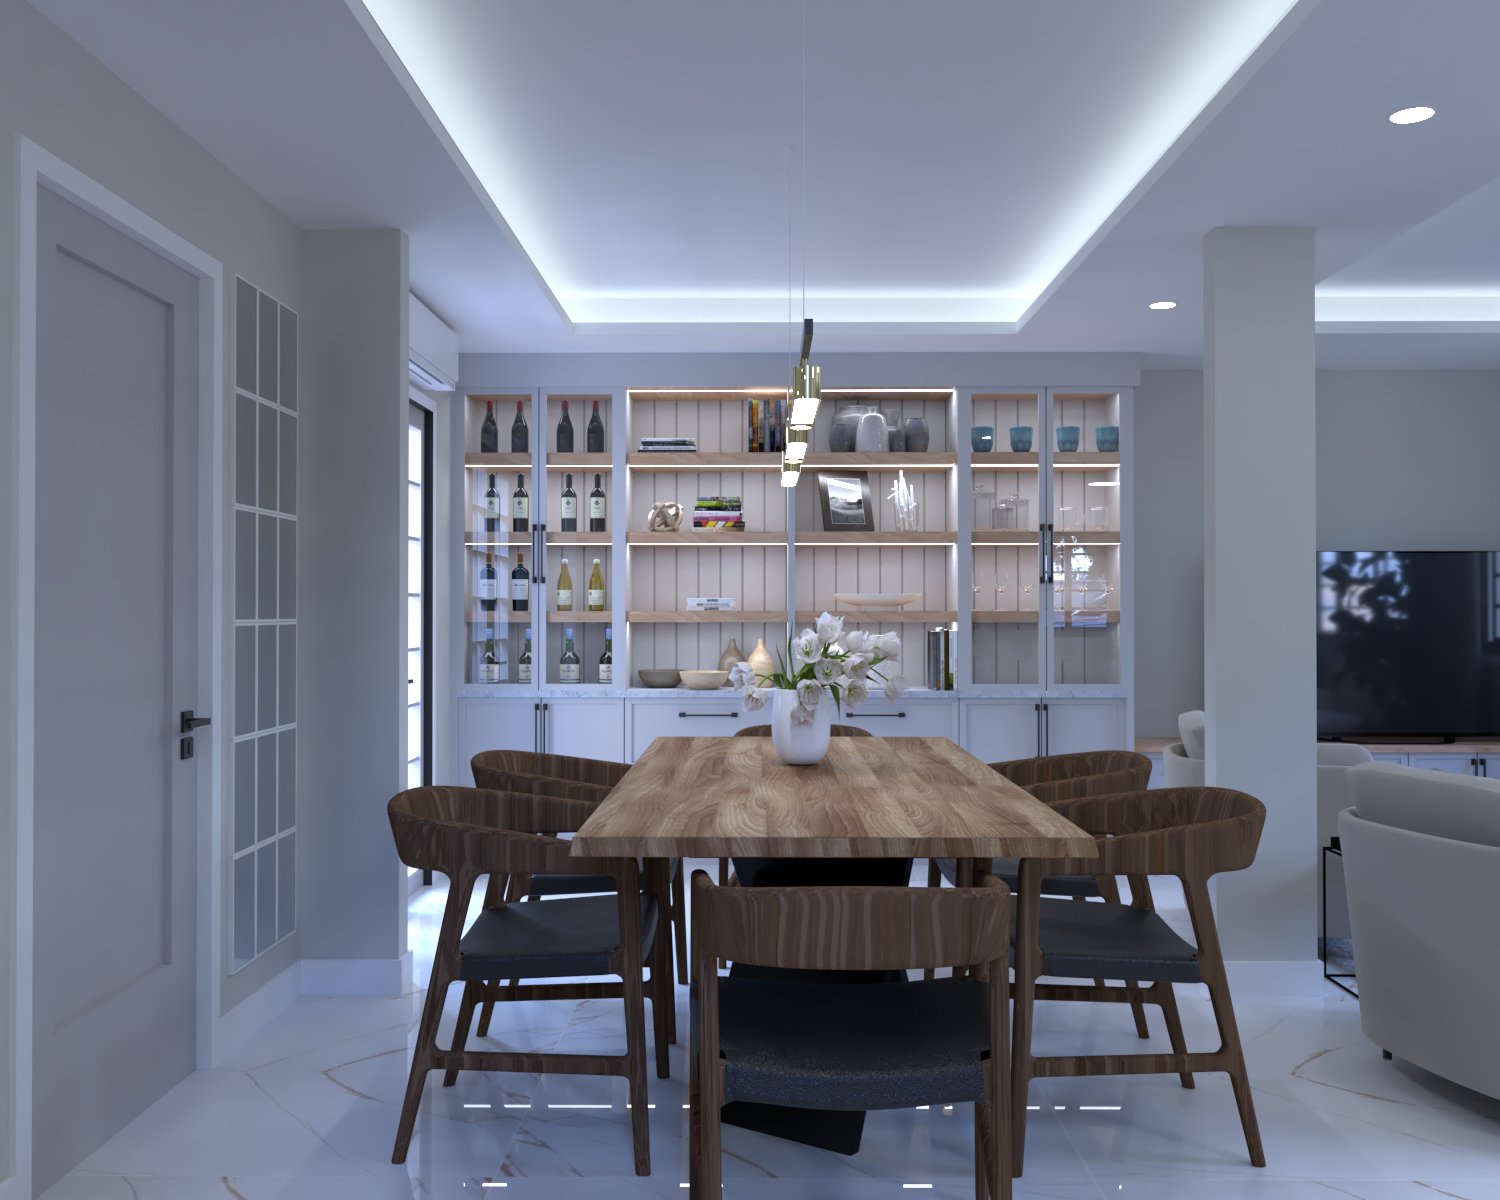 dining area with sophisticated built in display cabinet, marble floor, coved ceiling and wooden furniture